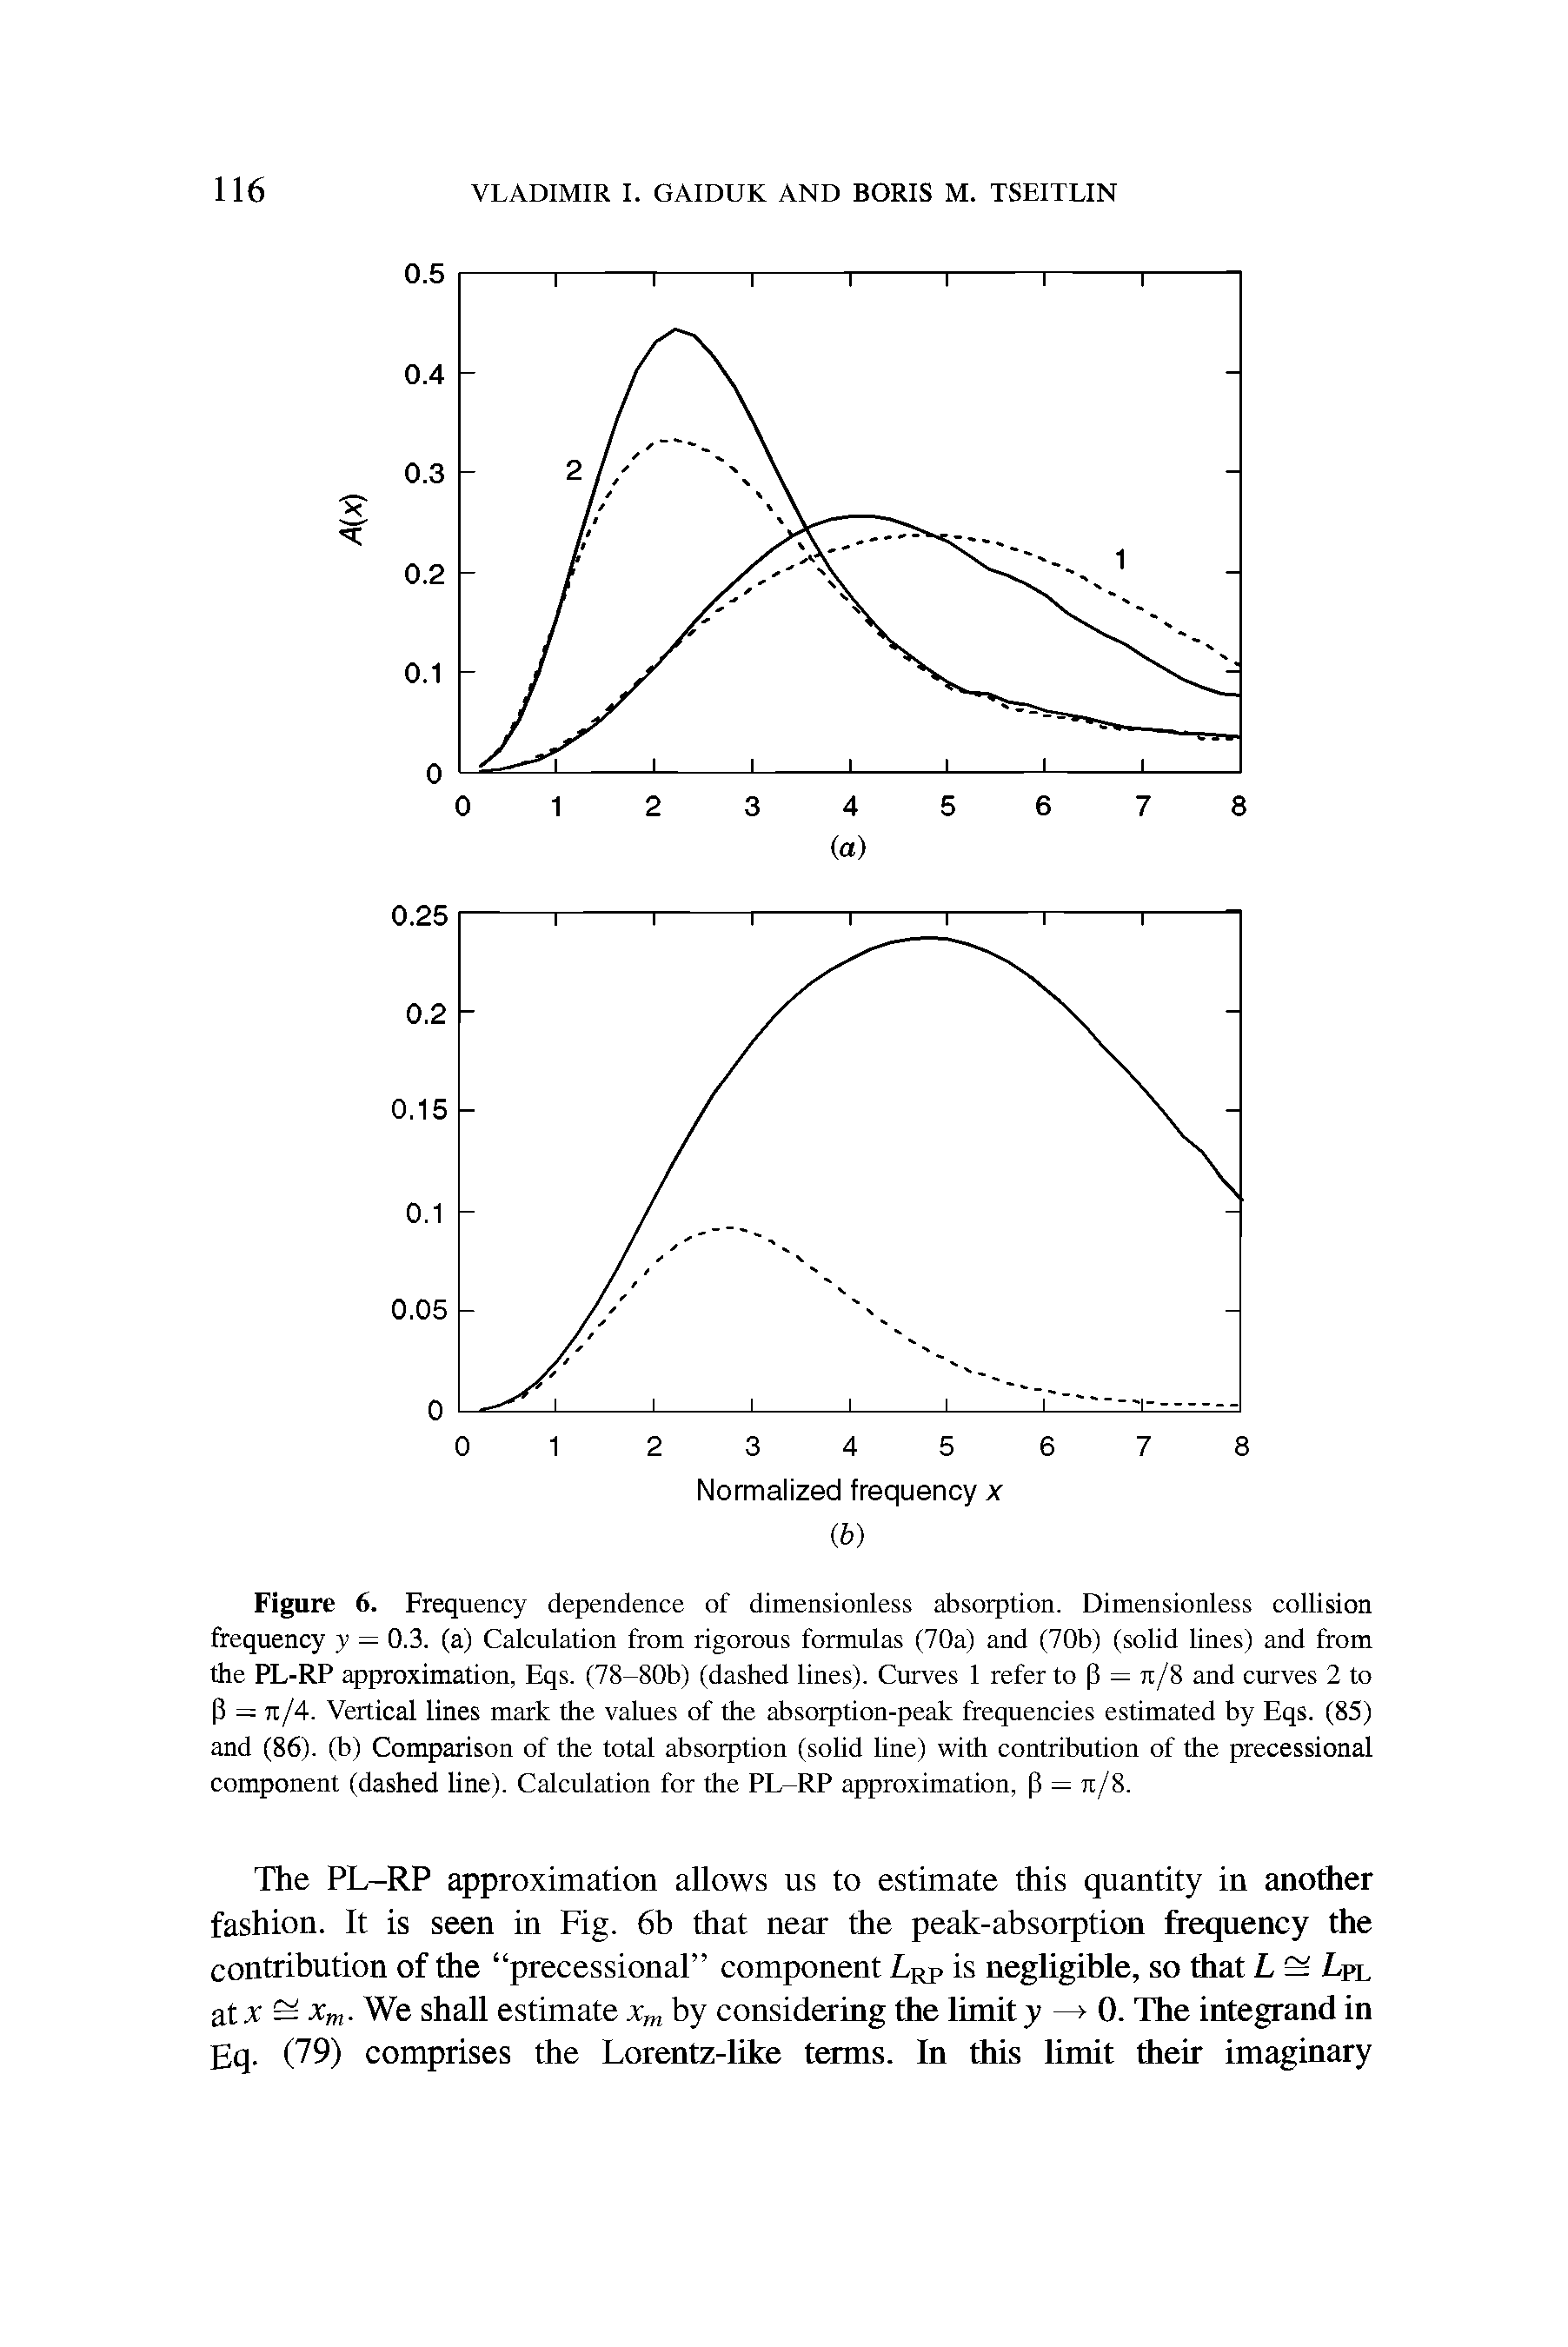 Figure 6. Frequency dependence of dimensionless absorption. Dimensionless collision frequency y = 0.3. (a) Calculation from rigorous formulas (70a) and (70b) (solid lines) and from the PL-RP approximation, Eqs. (78-80b) (dashed lines). Curves 1 refer to P = ji/8 and curves 2 to (3 = ti/4. Vertical lines mark the values of the absorption-peak frequencies estimated by Eqs. (85) and (86). (b) Comparison of the total absorption (solid line) with contribution of the precessional component (dashed line). Calculation for the PL-RP approximation, P = ji/8.